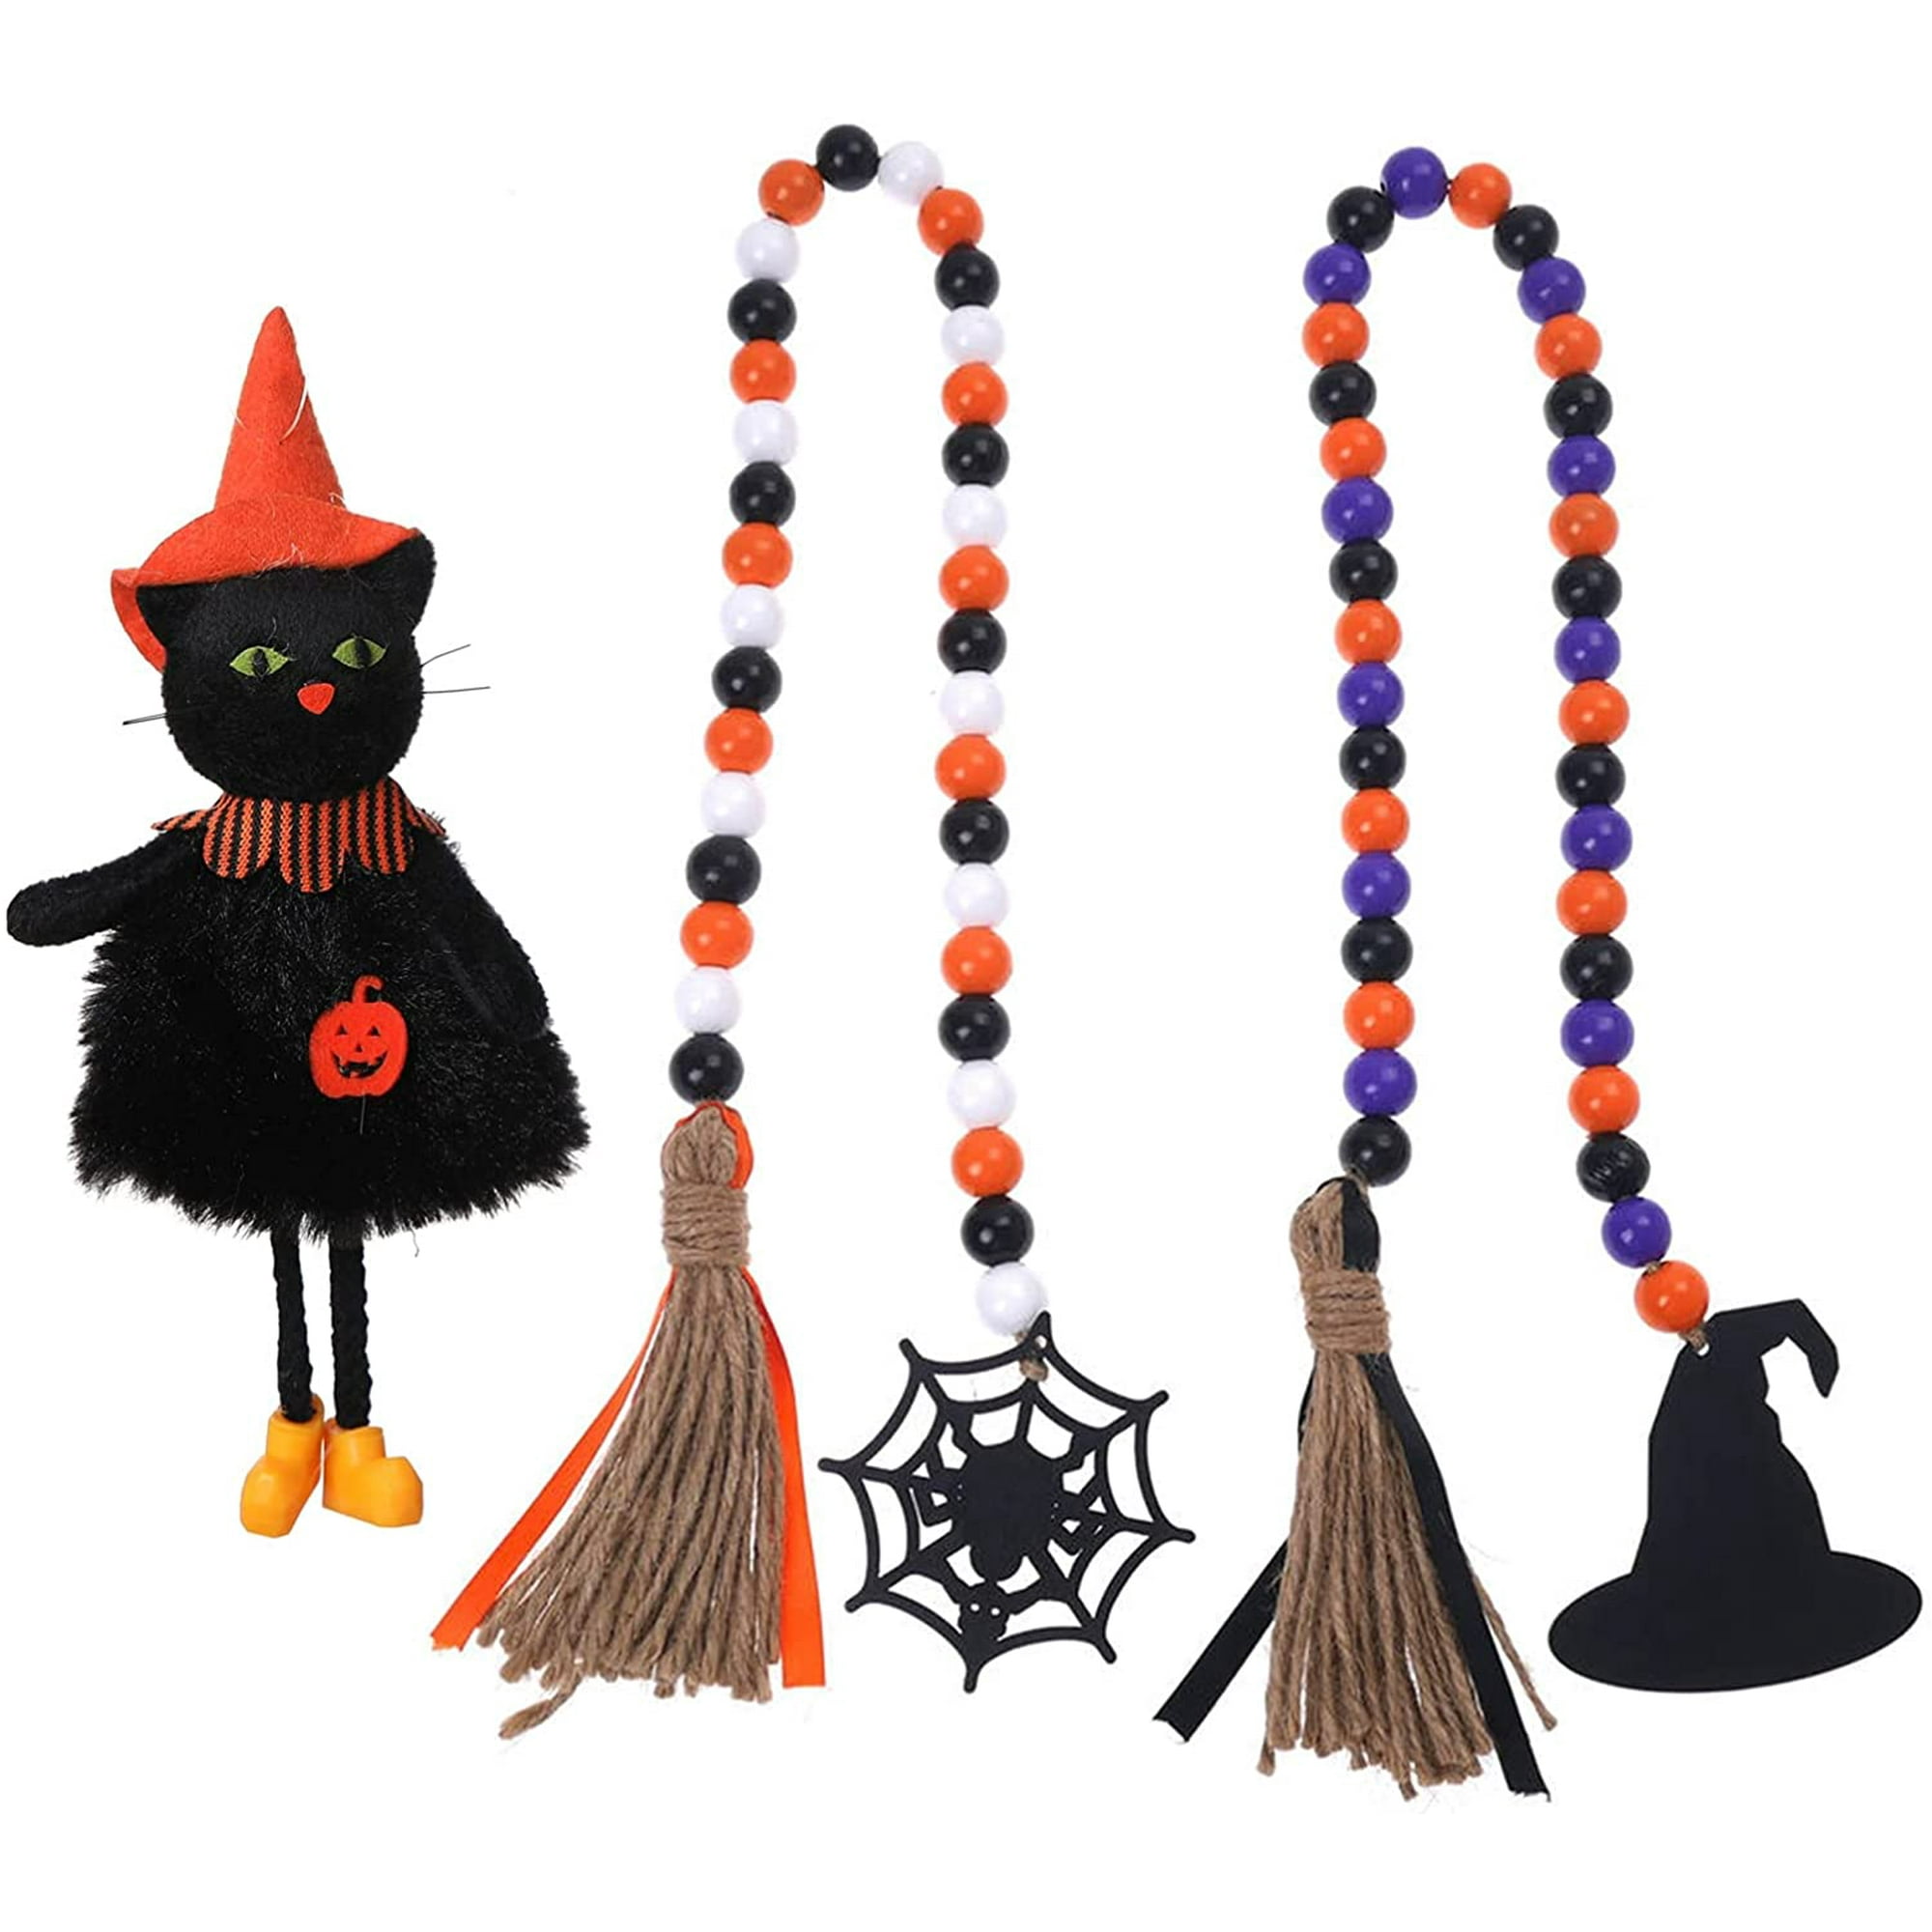 2 PCS Halloween Wooden Bead Garland with Witch Hat, Spider Web Signs and  Tassels, Rustic Country Farmhouse Bead Wall Hanging Garland with Black Cat  Ornament for Halloween Party Decoration | Walmart Canada